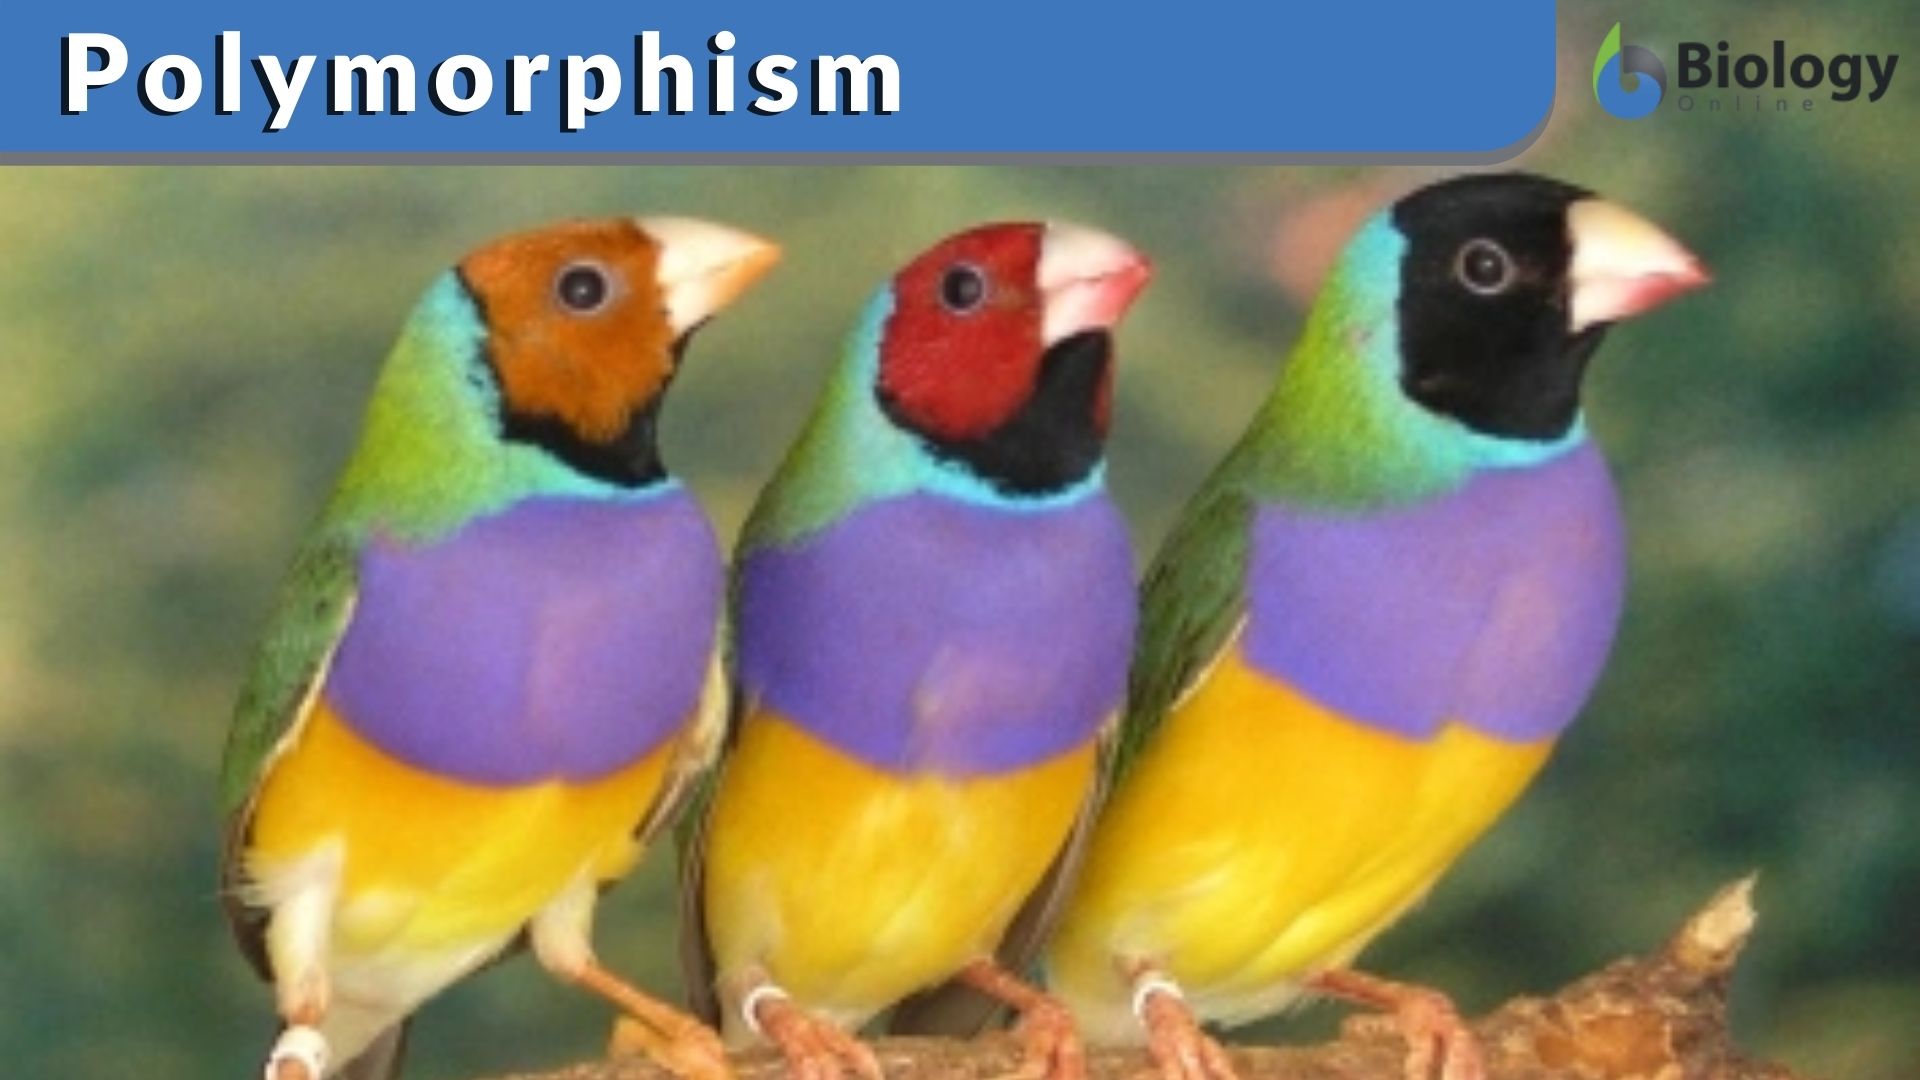 Polymorphism - Definition and Examples - Biology Online Dictionary